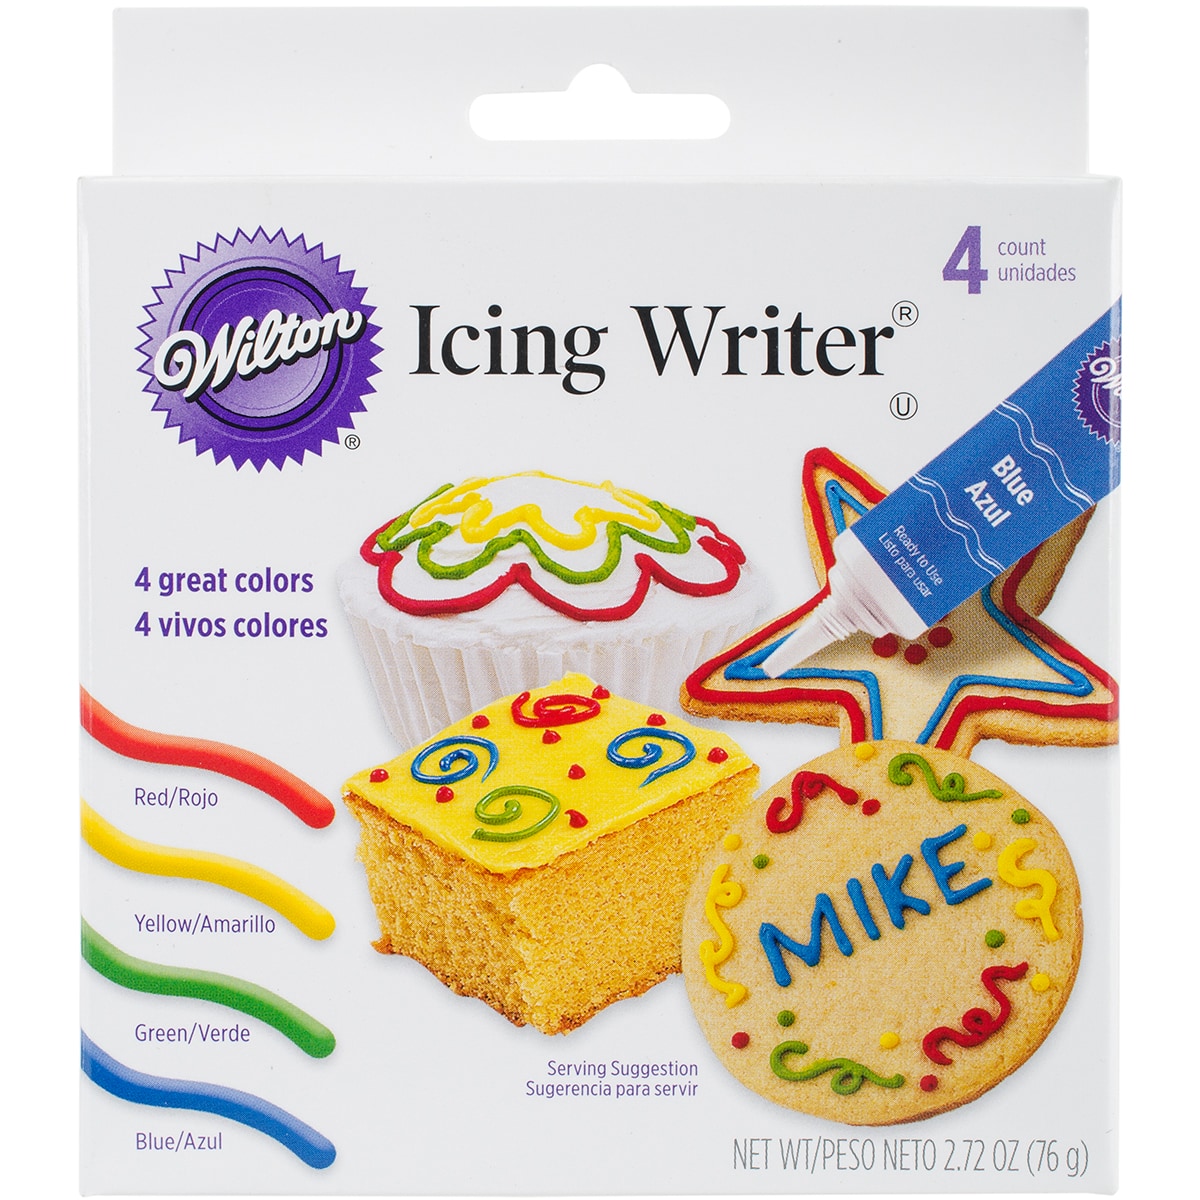 How to Color Icing - Wilton